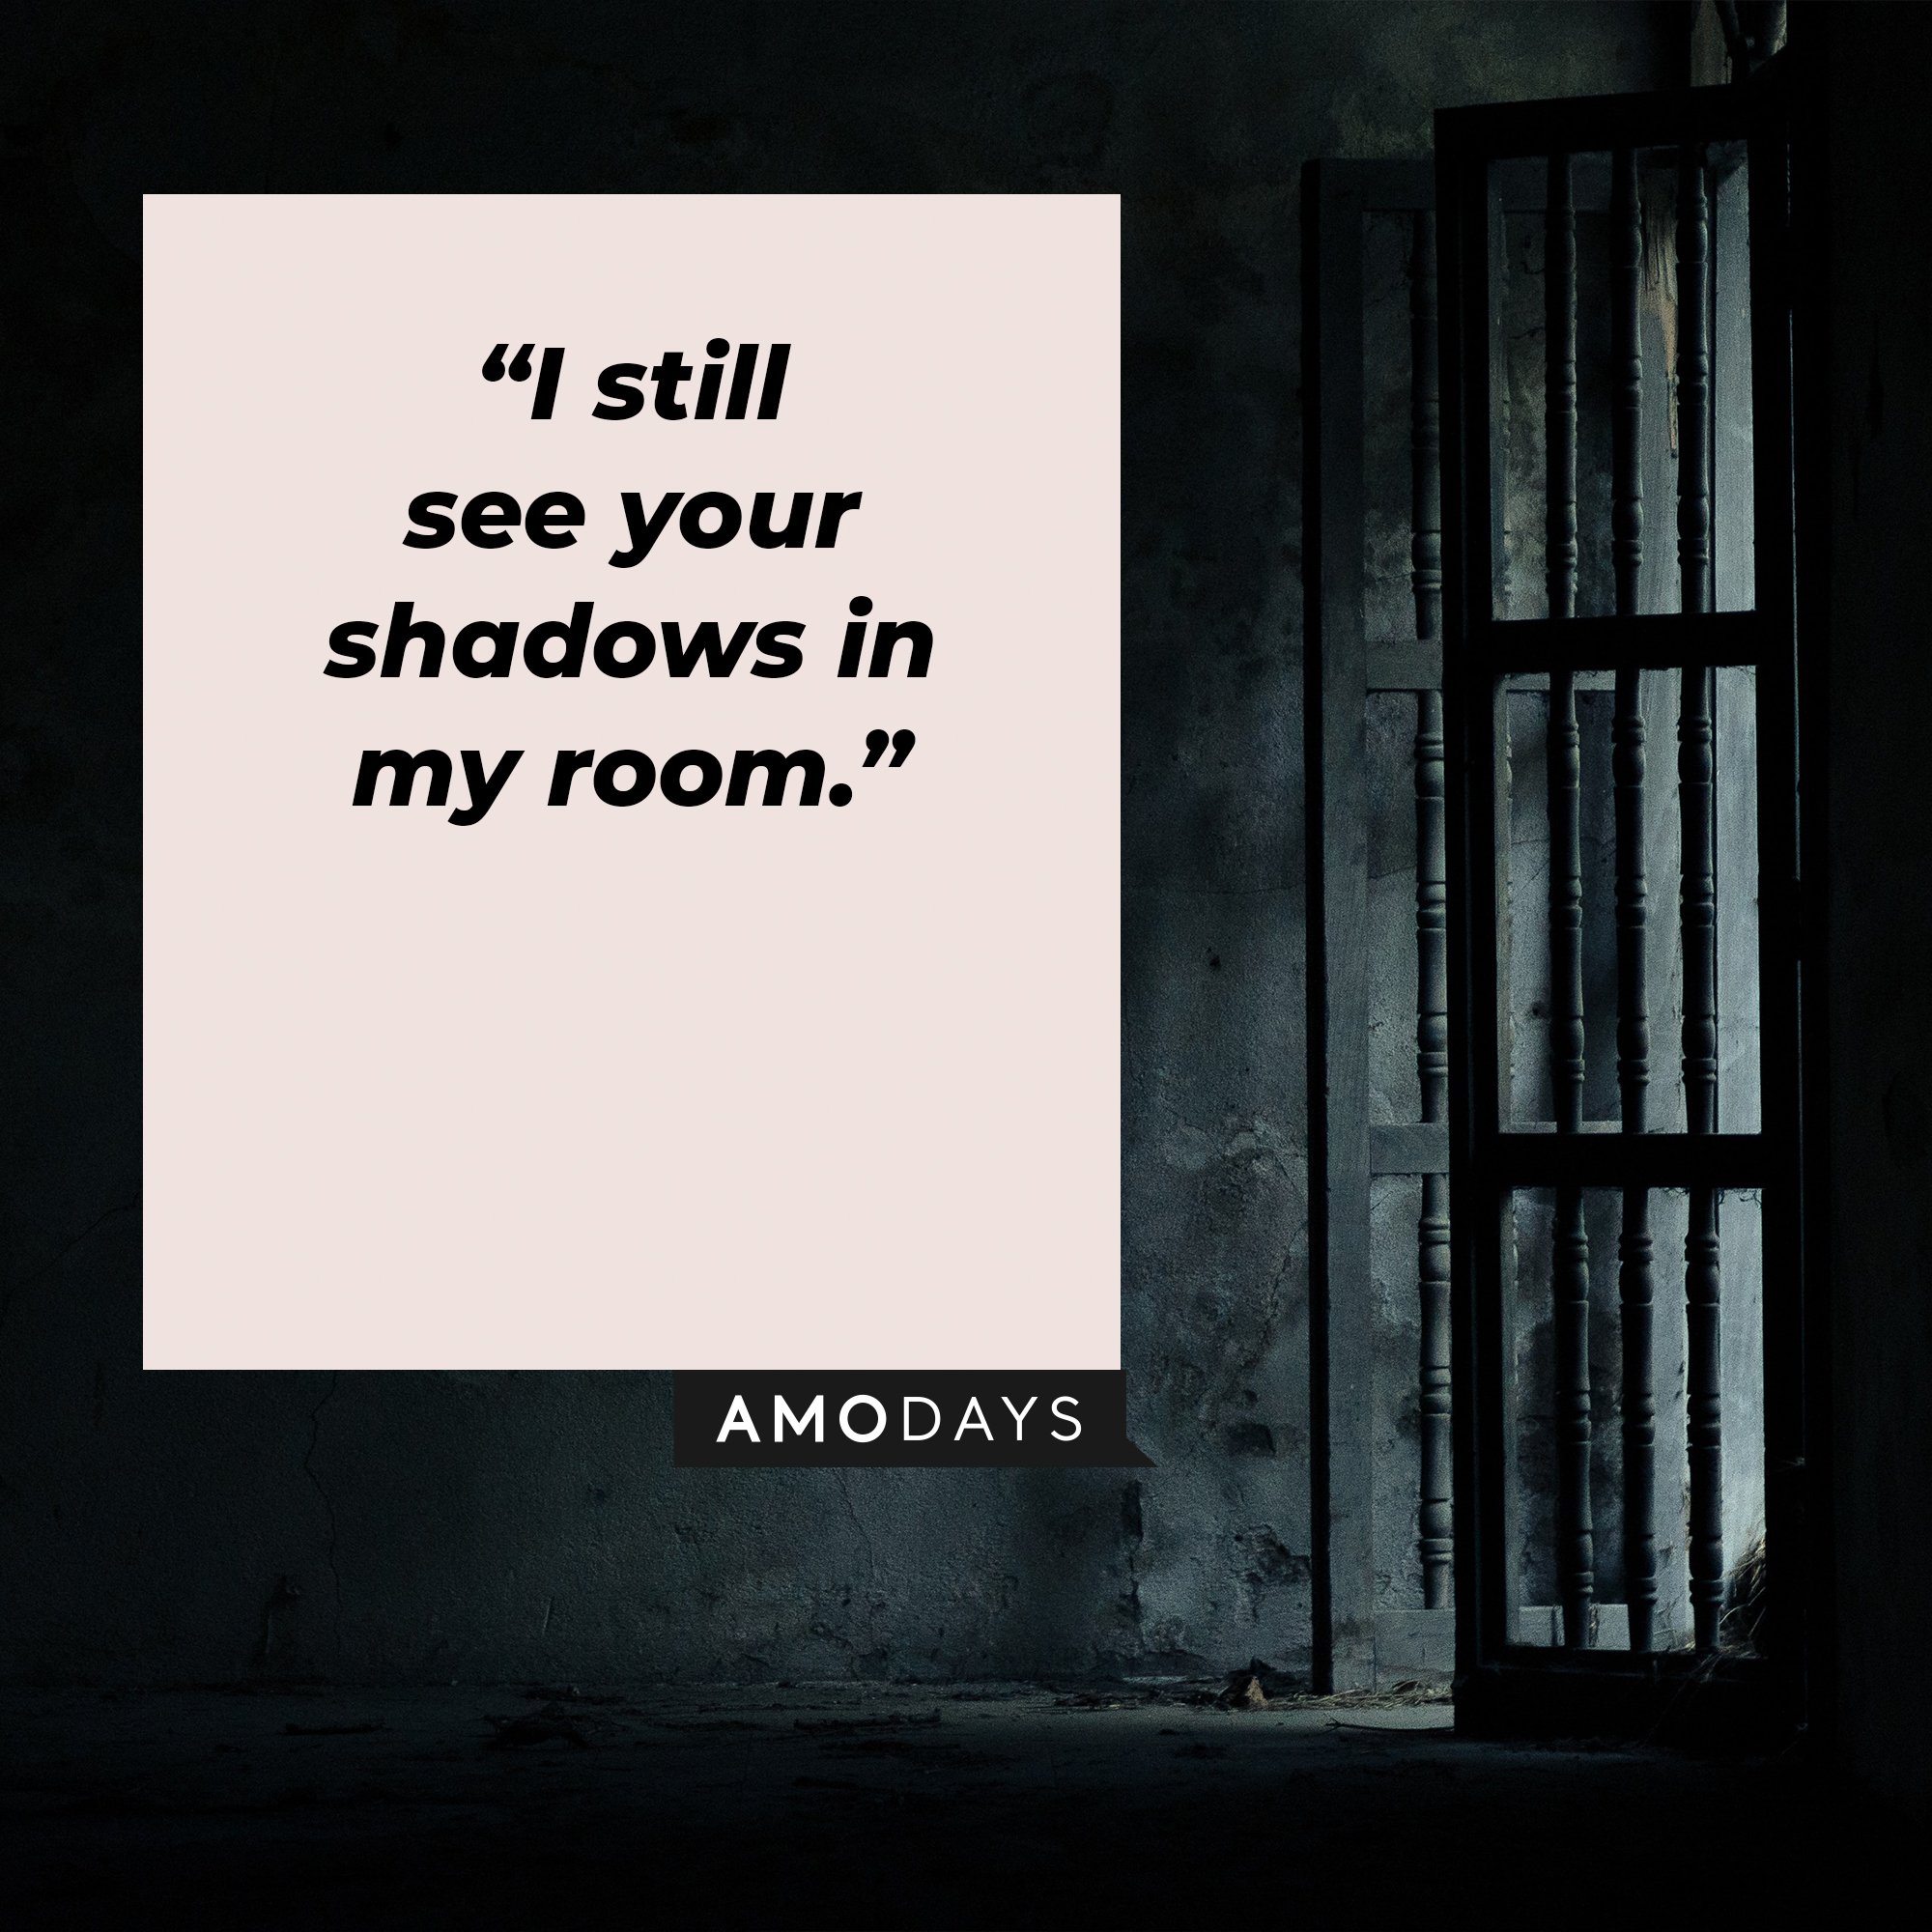 Juice WRLD’s quote: “I still see your shadows in my room.” | Image: AmoDays